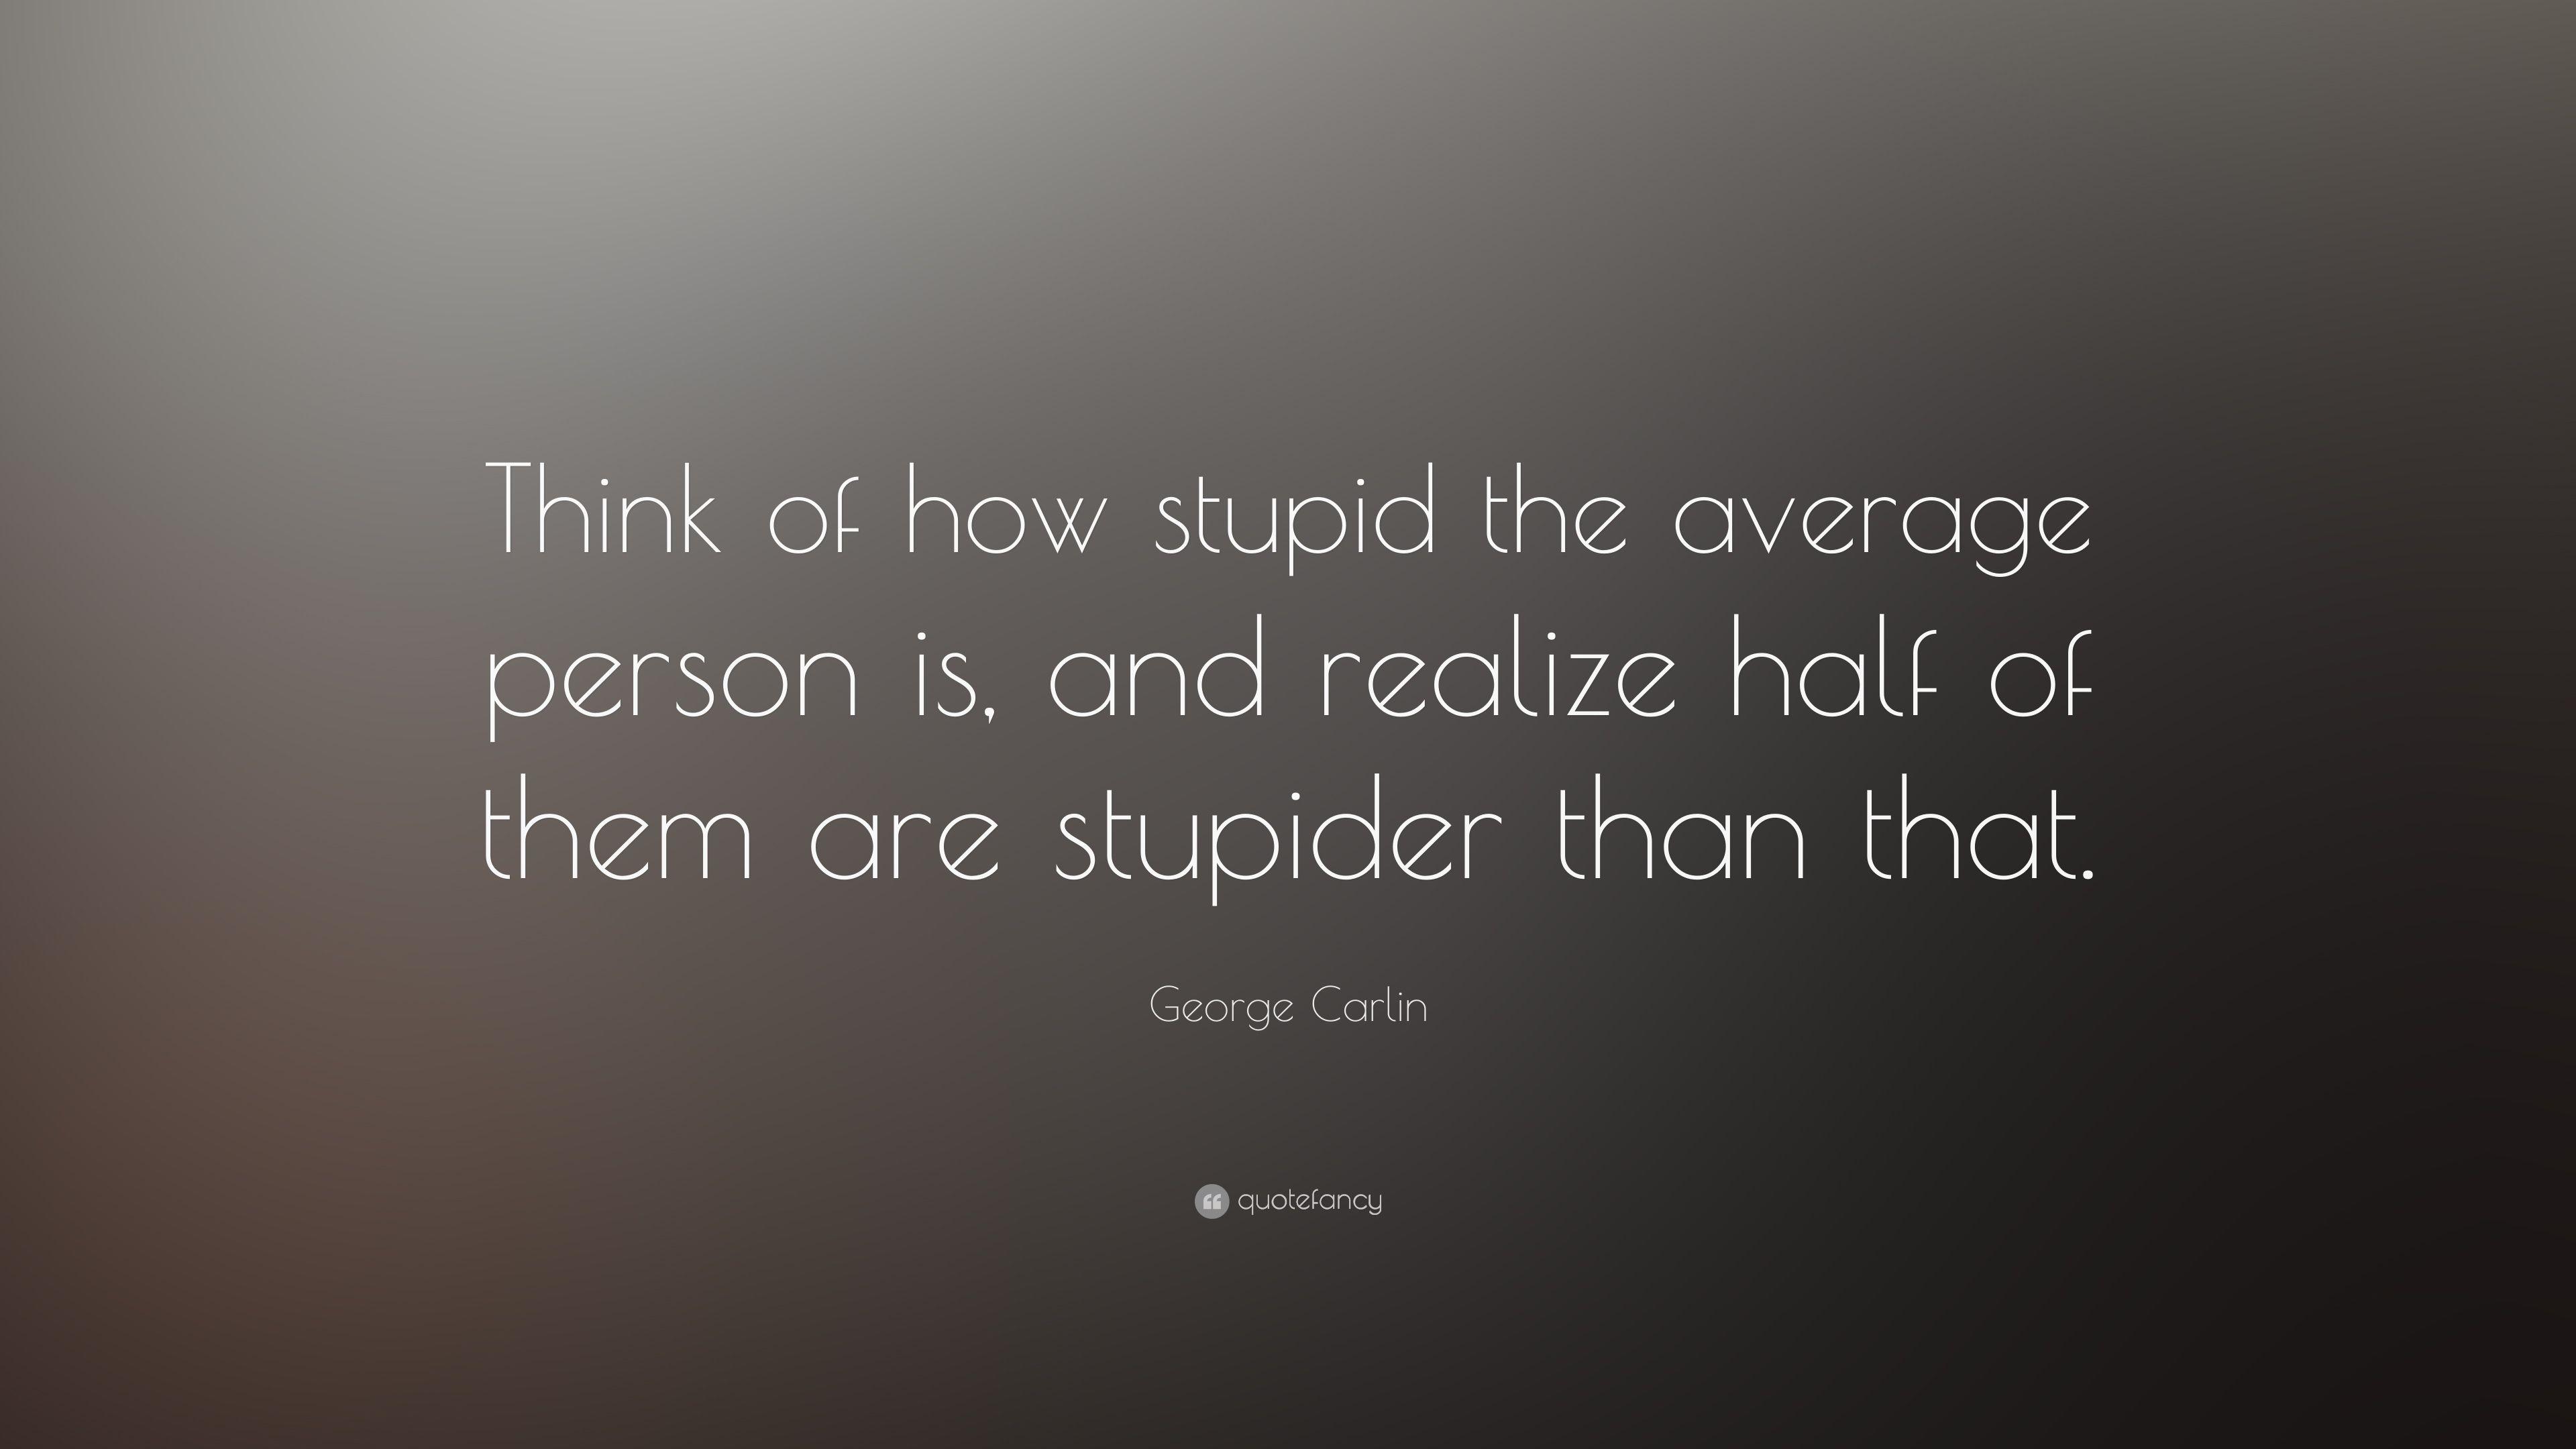 George Carlin Quote: “Think of how stupid the average person is